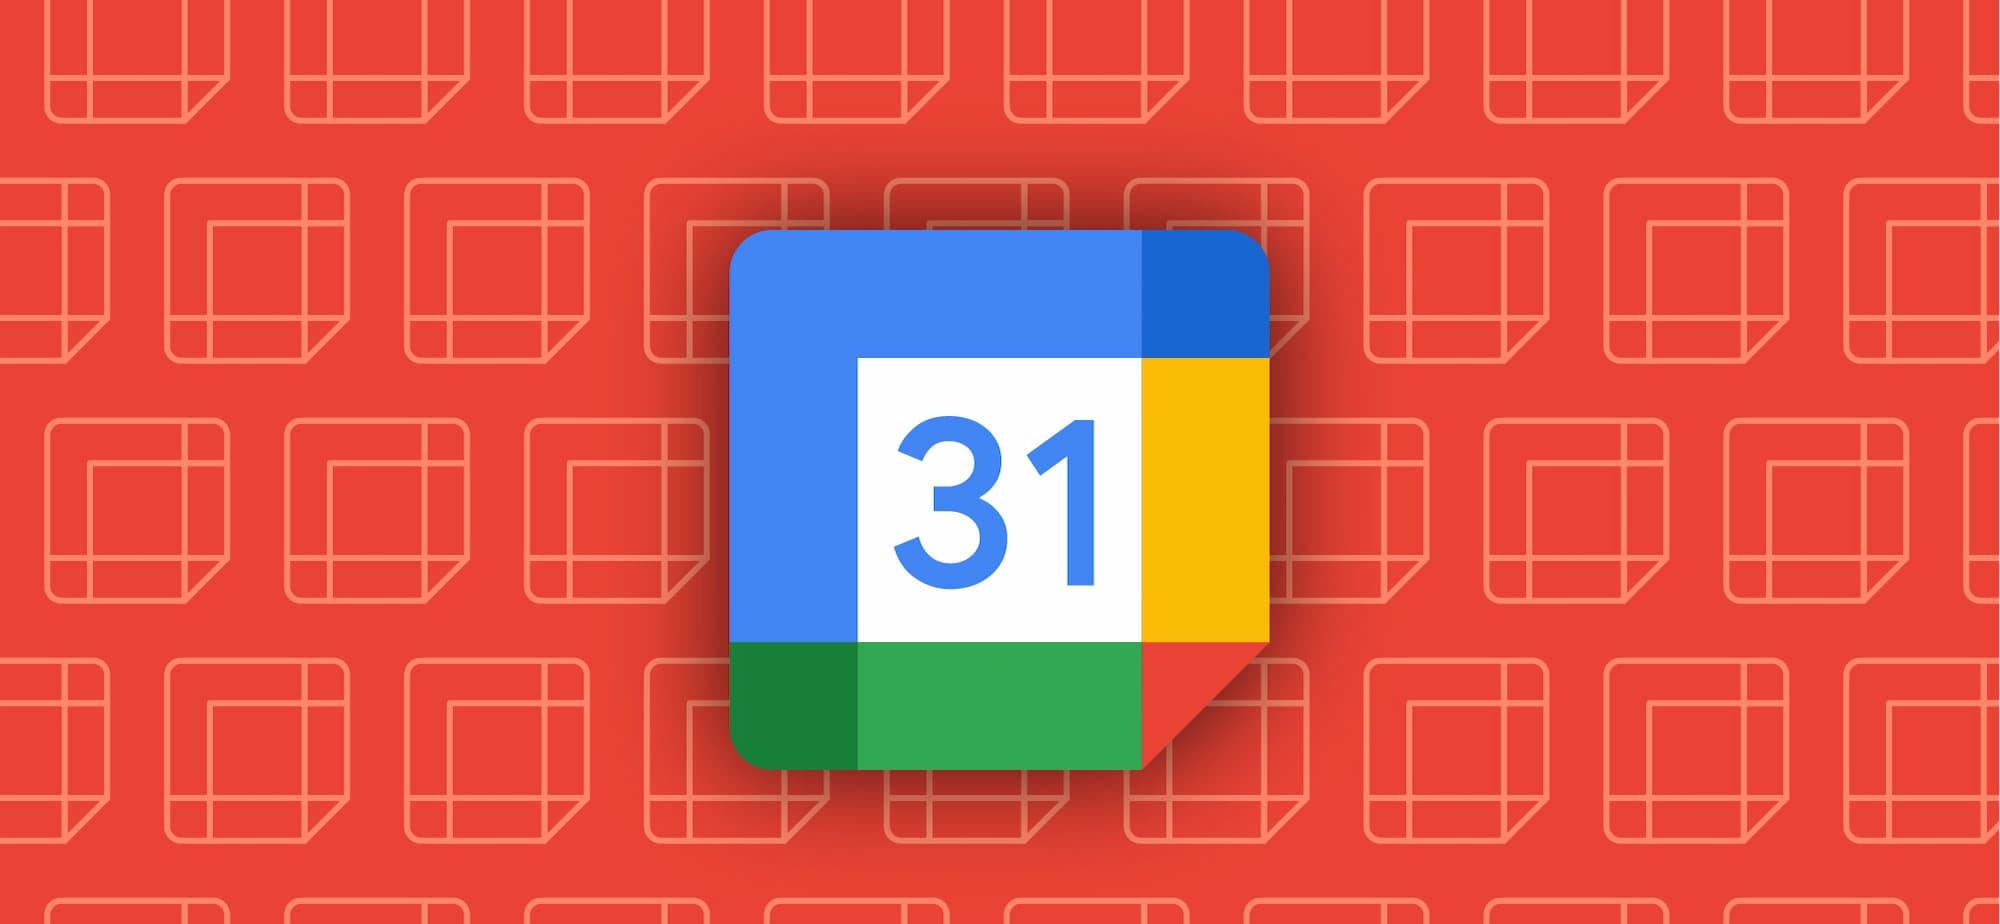 Google Calendar Replaces Appointment Slots with Appointment Schedules